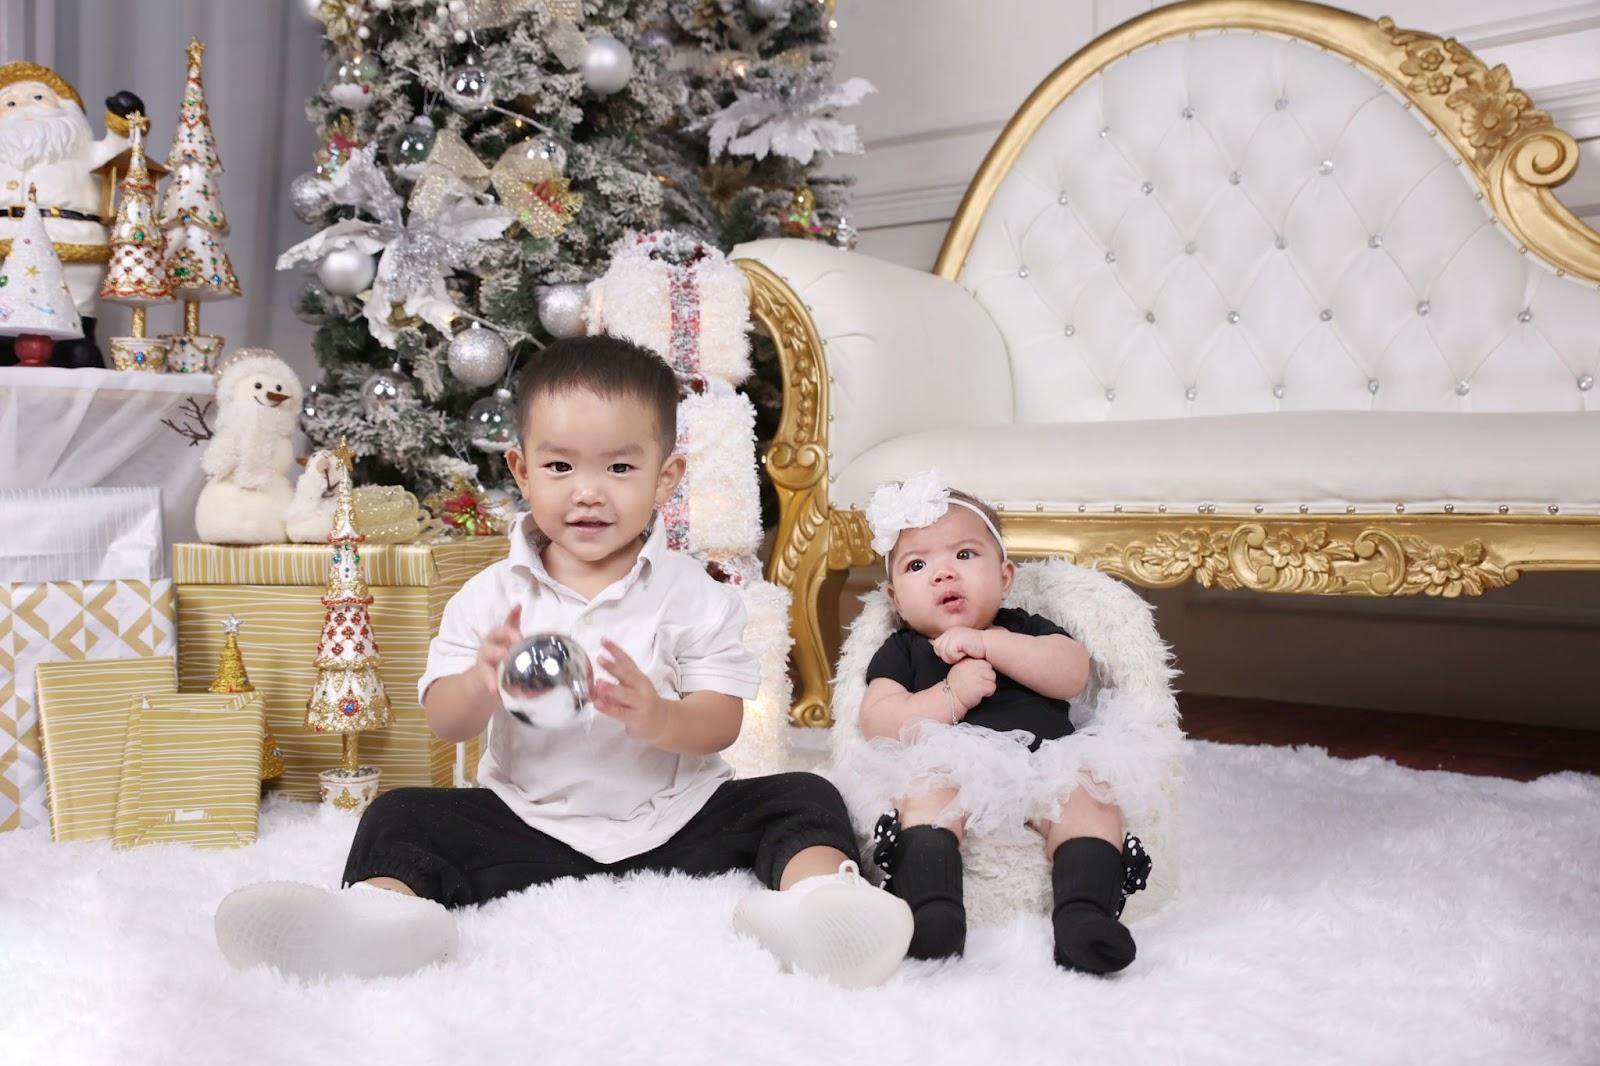 Family Christmas Photo Outfit Ideas: black and white combo outfits